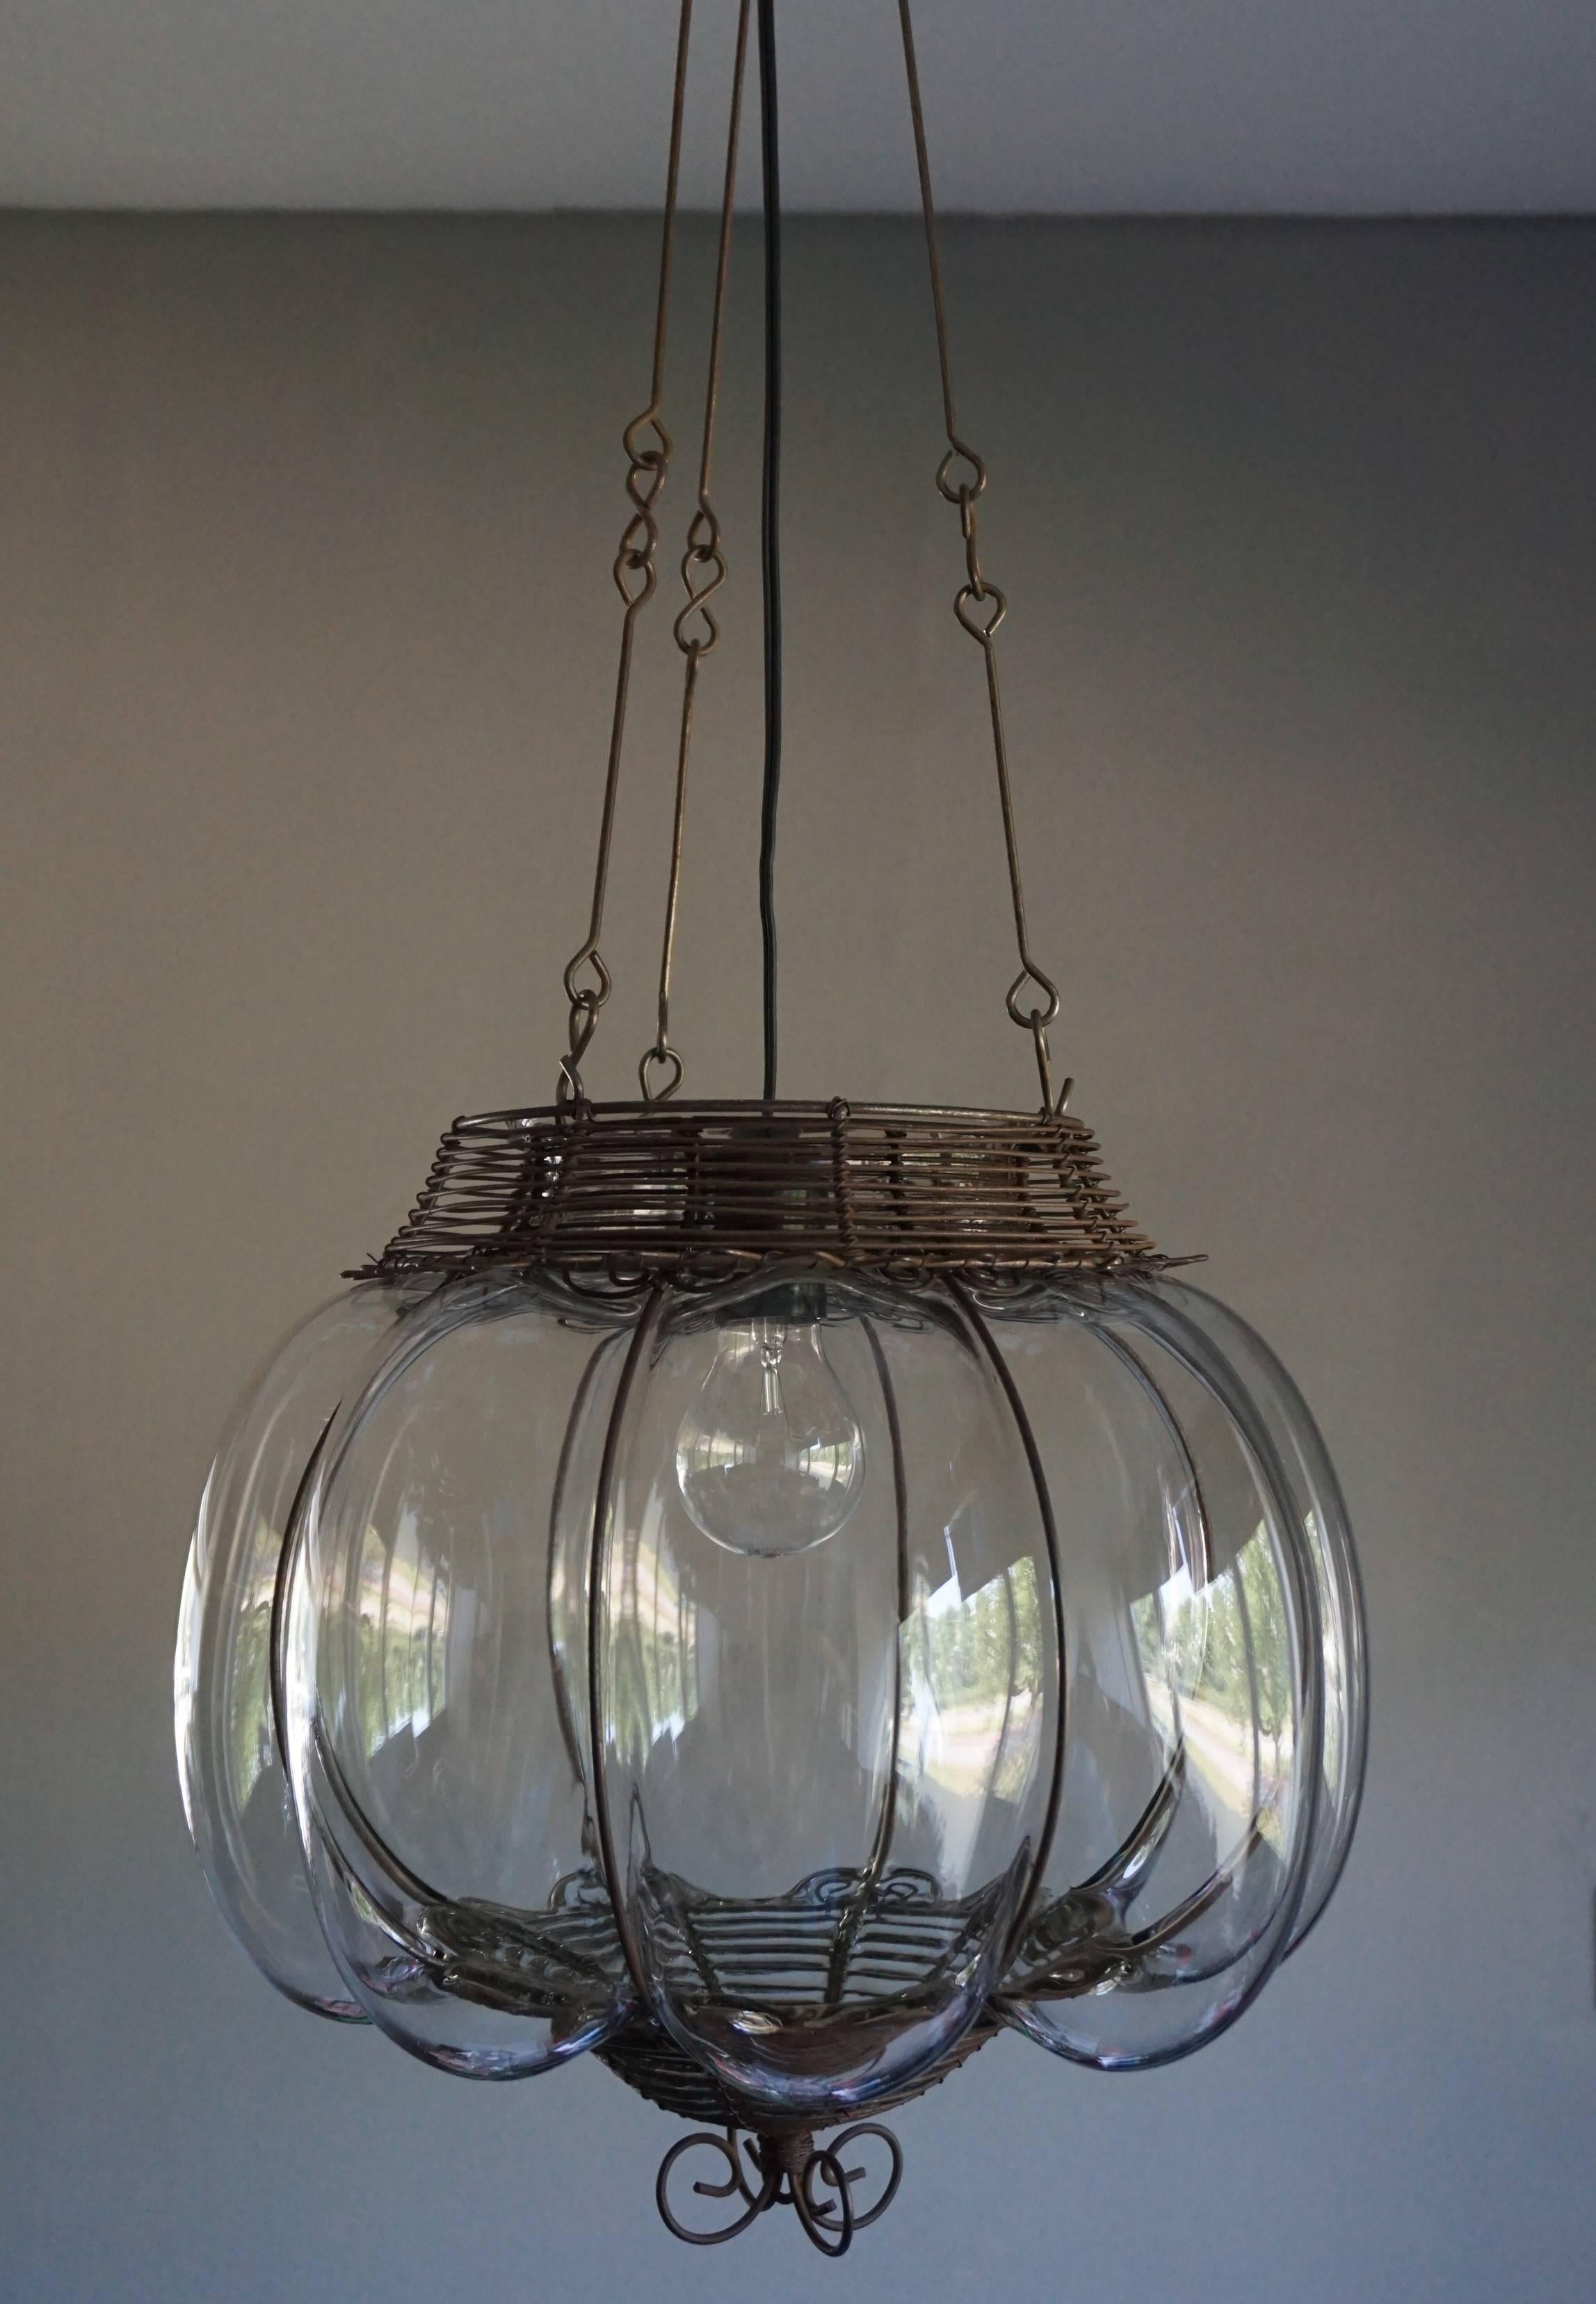 Venetian Mouthblown Glass into a Hand-crafted Iron Frame Pendant Light Fixture For Sale 3